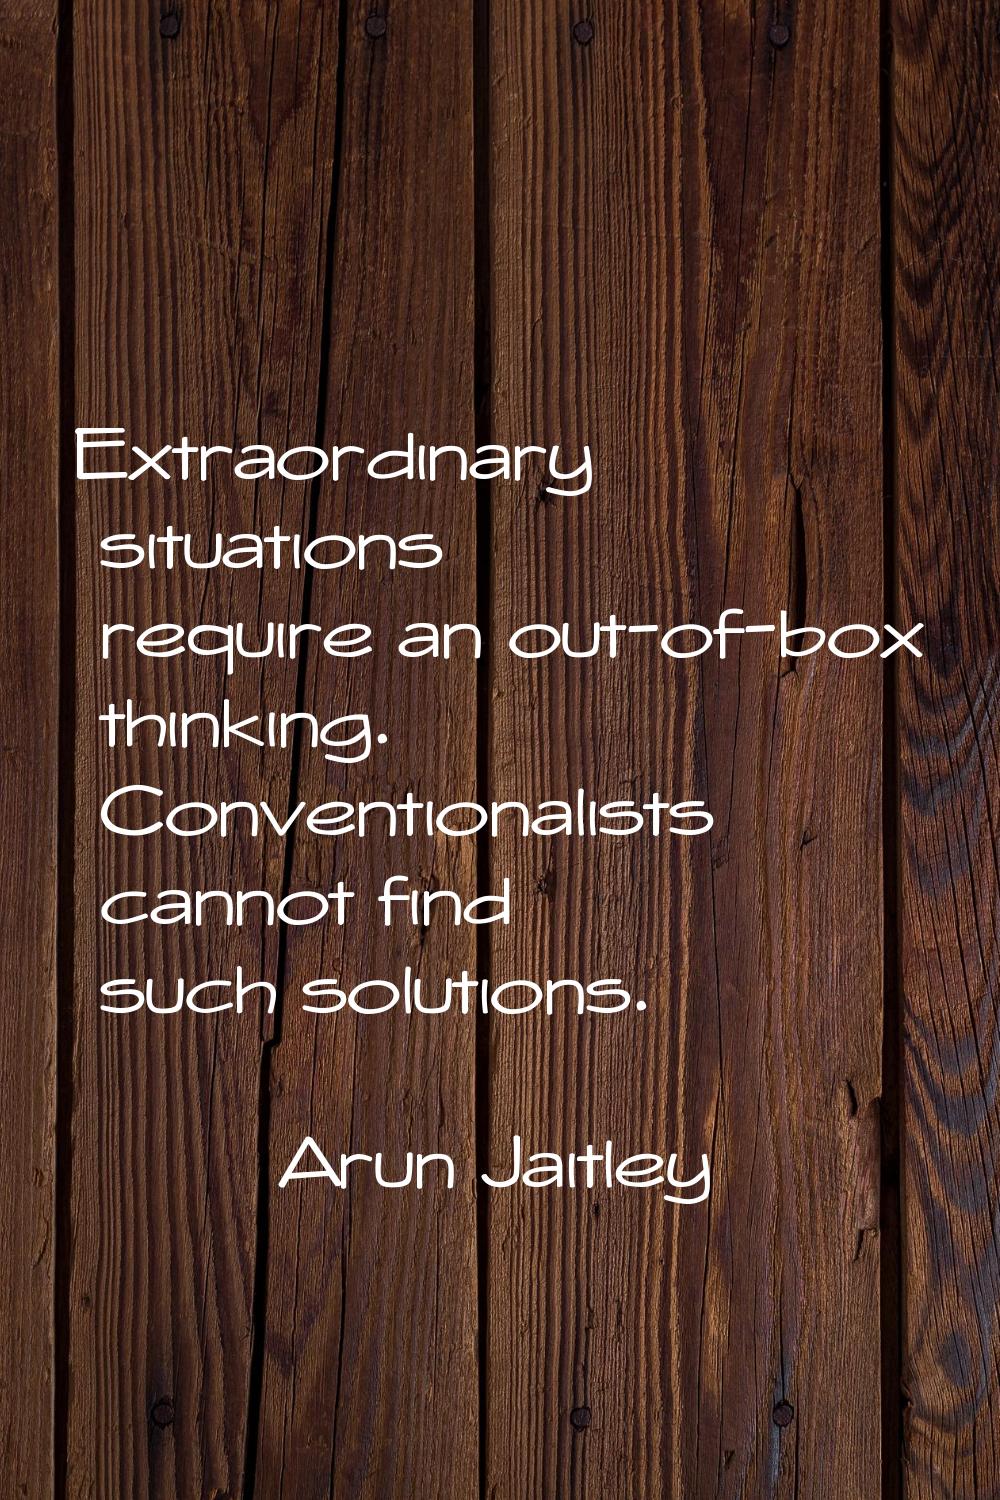 Extraordinary situations require an out-of-box thinking. Conventionalists cannot find such solution